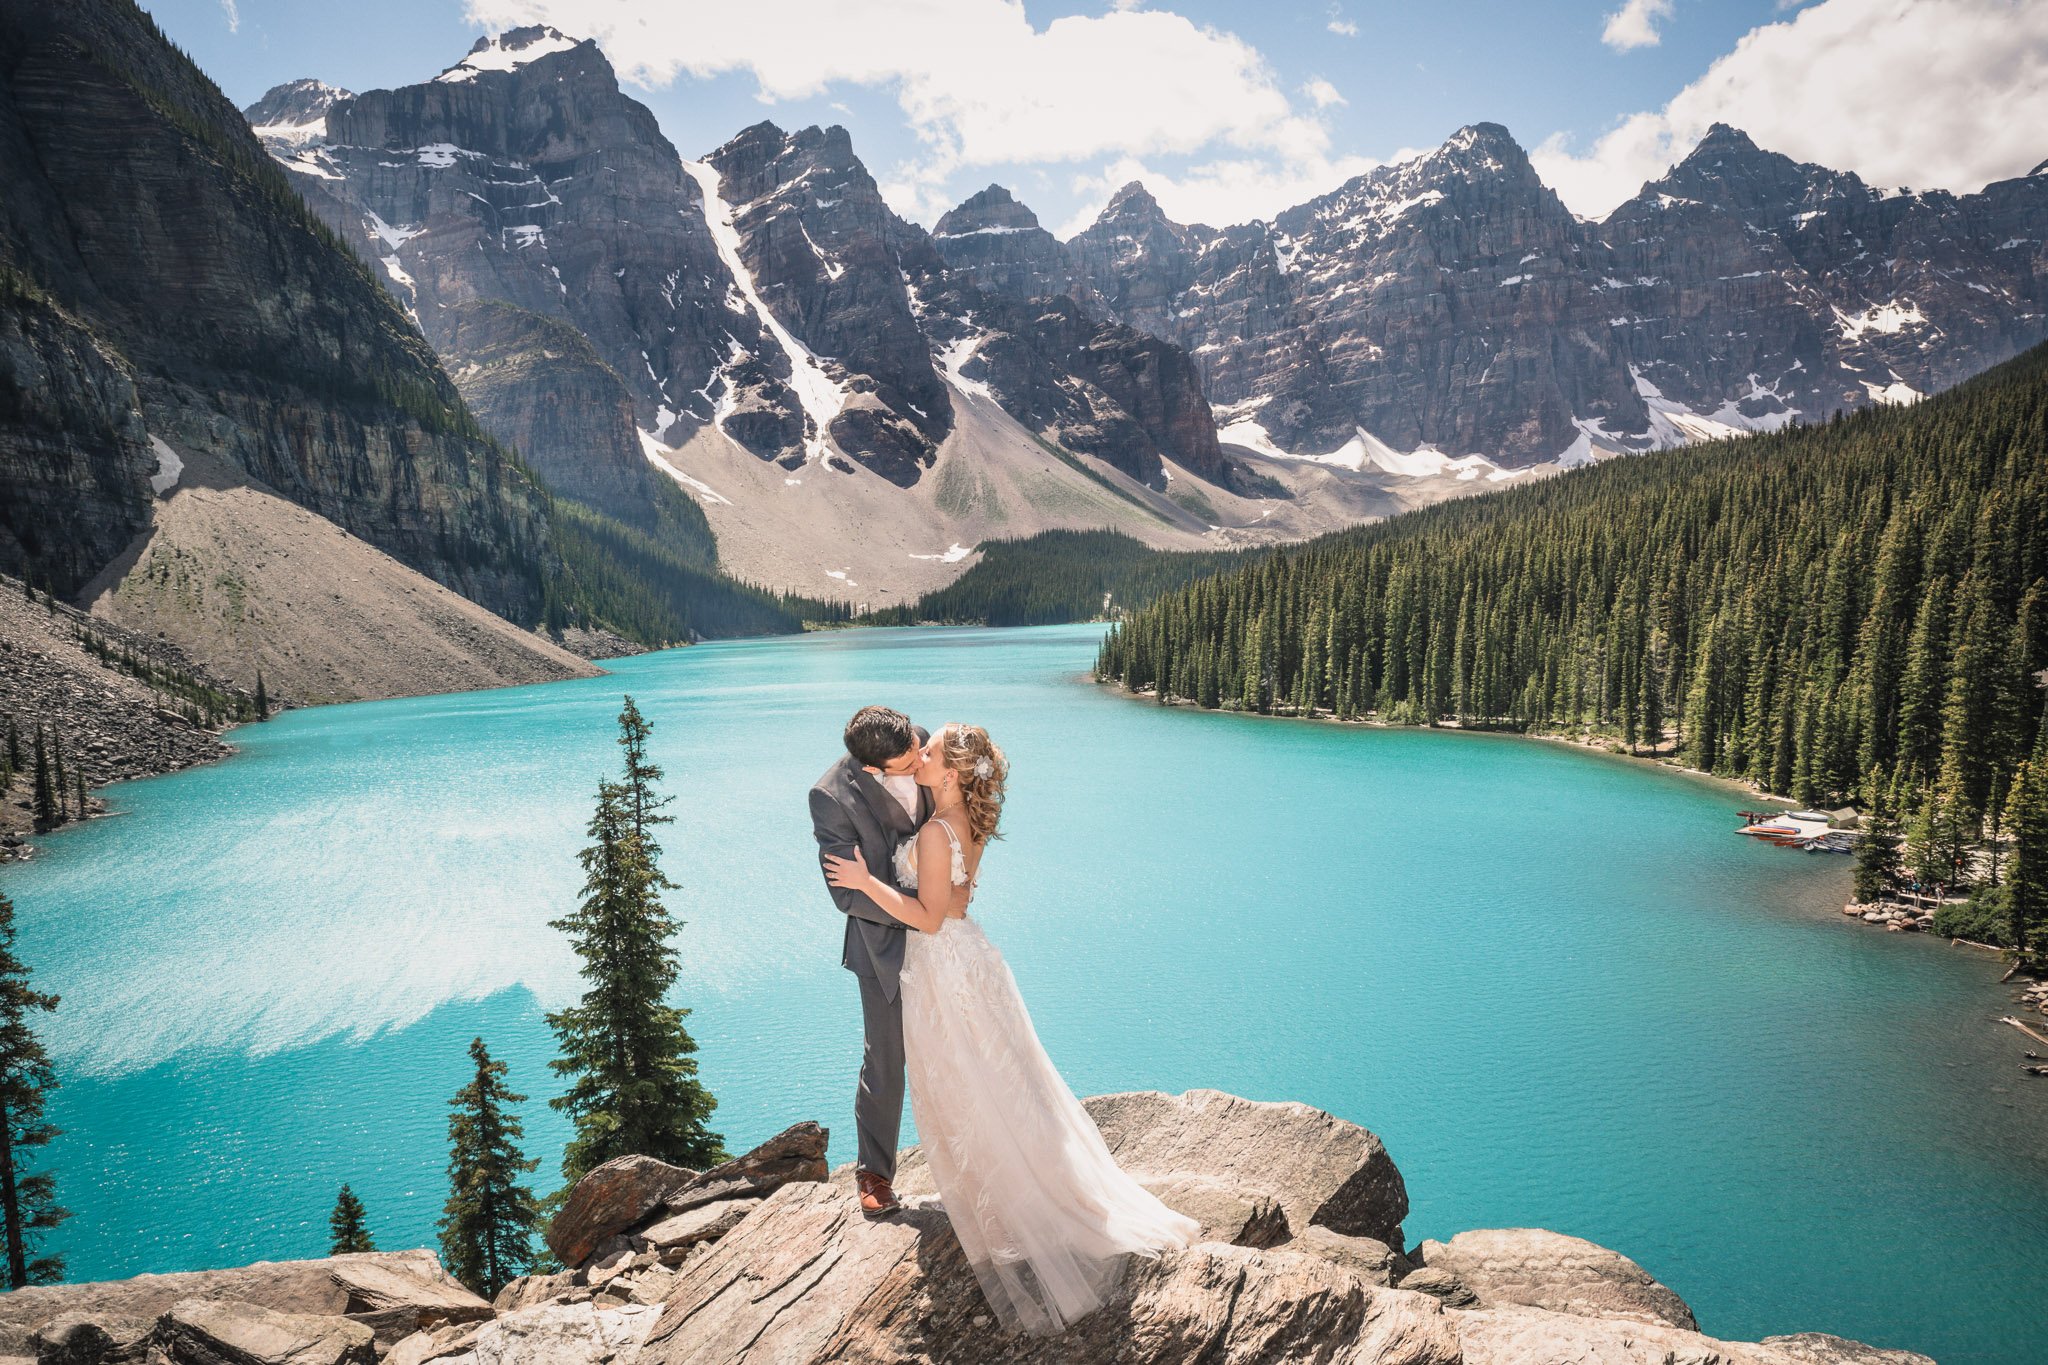 Wedding Venues in Banff and Canmore